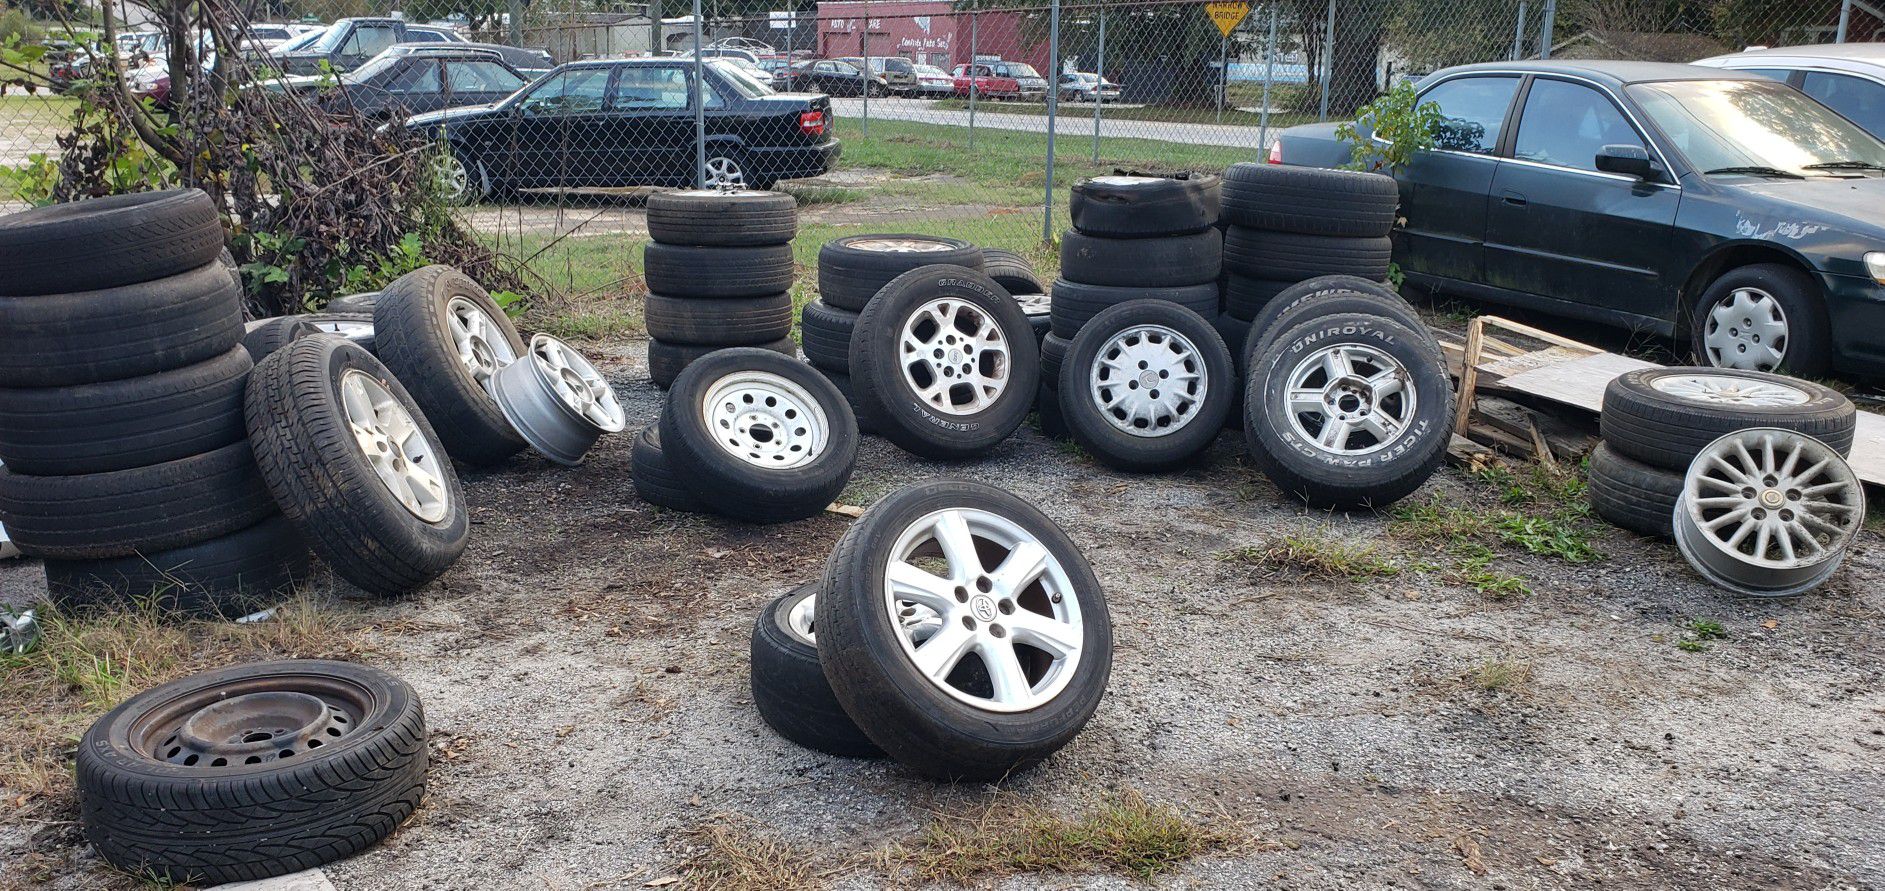 USED RIMS WITH TIRES - $45 EACH